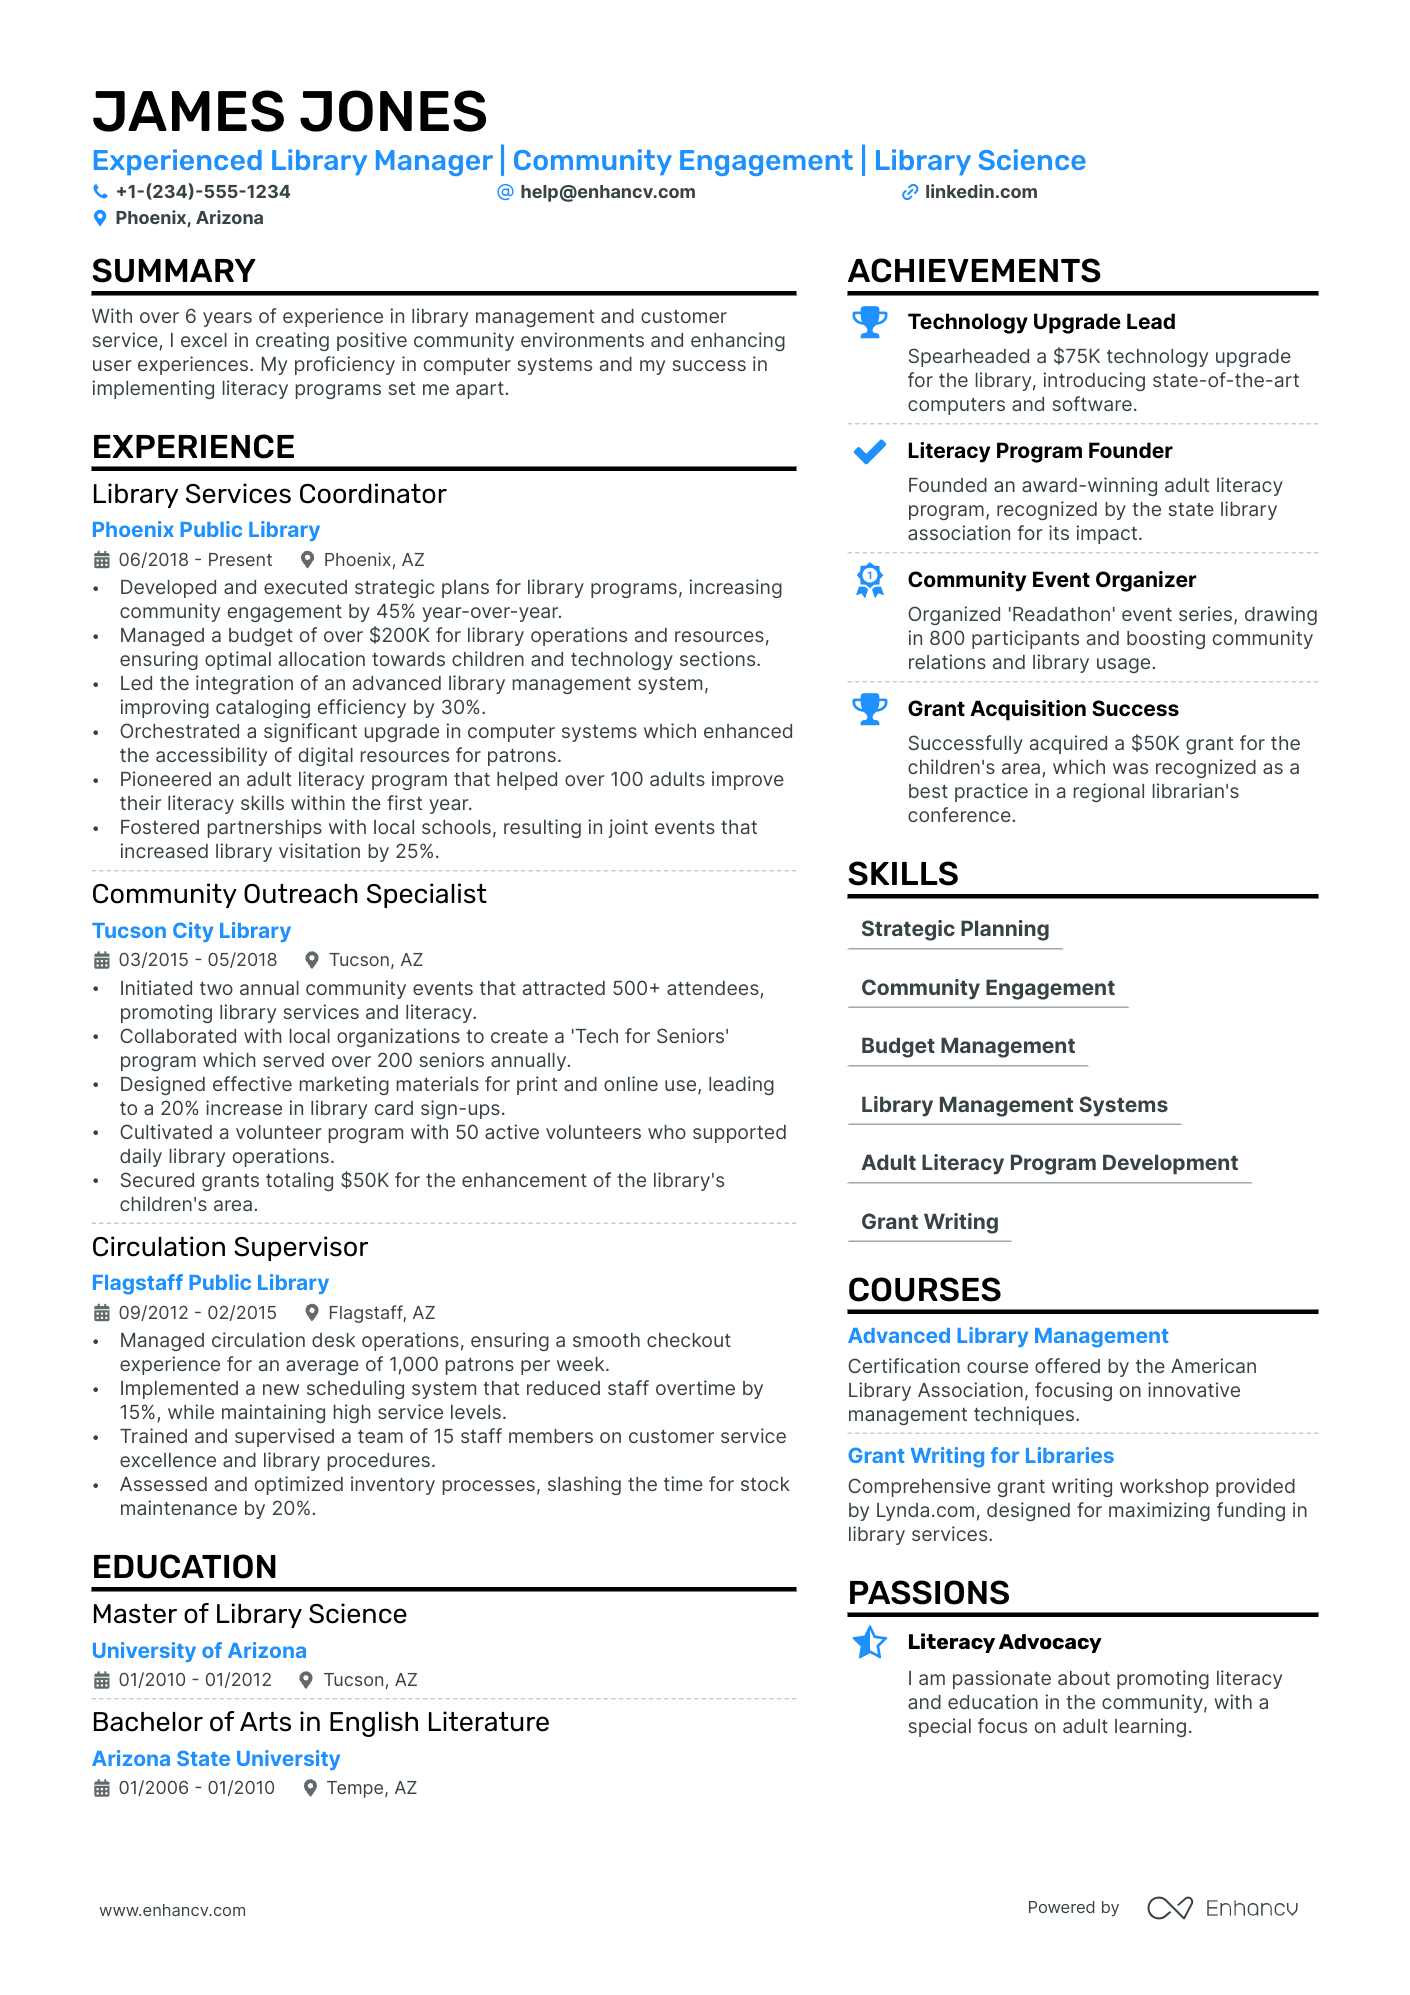 Library Director resume example